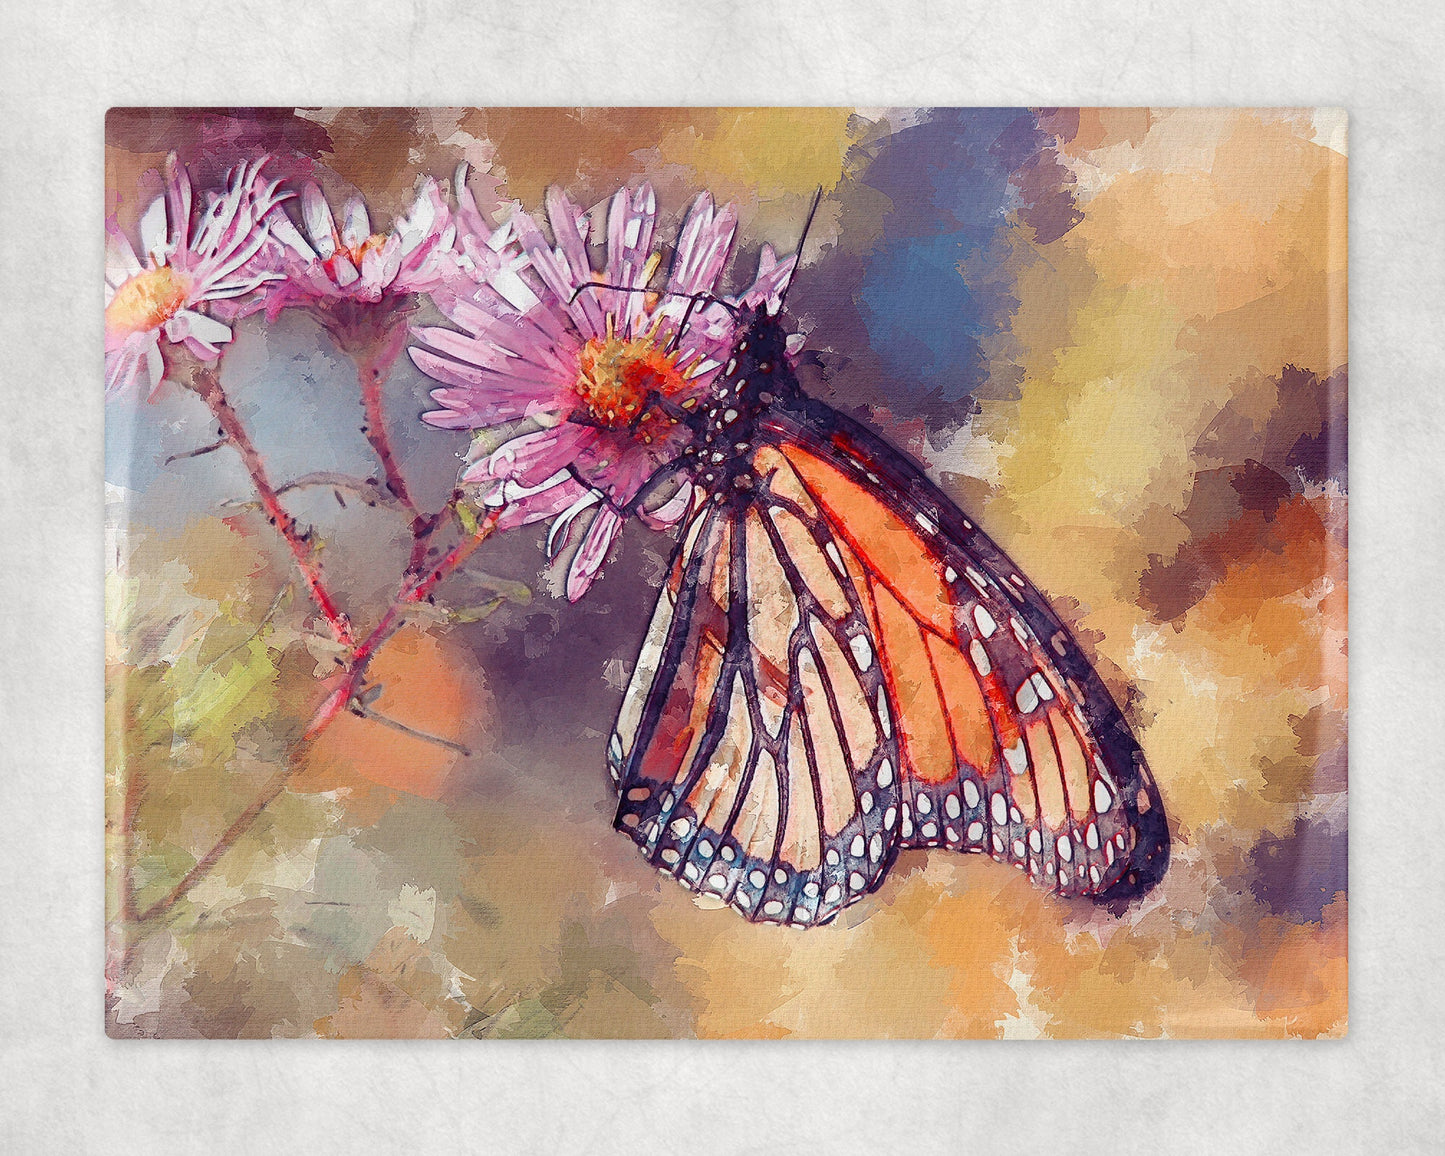 Painted Style Monarch Butterfly Art Decorative Ceramic Tile with Optional Easel Back - 6x8 inches